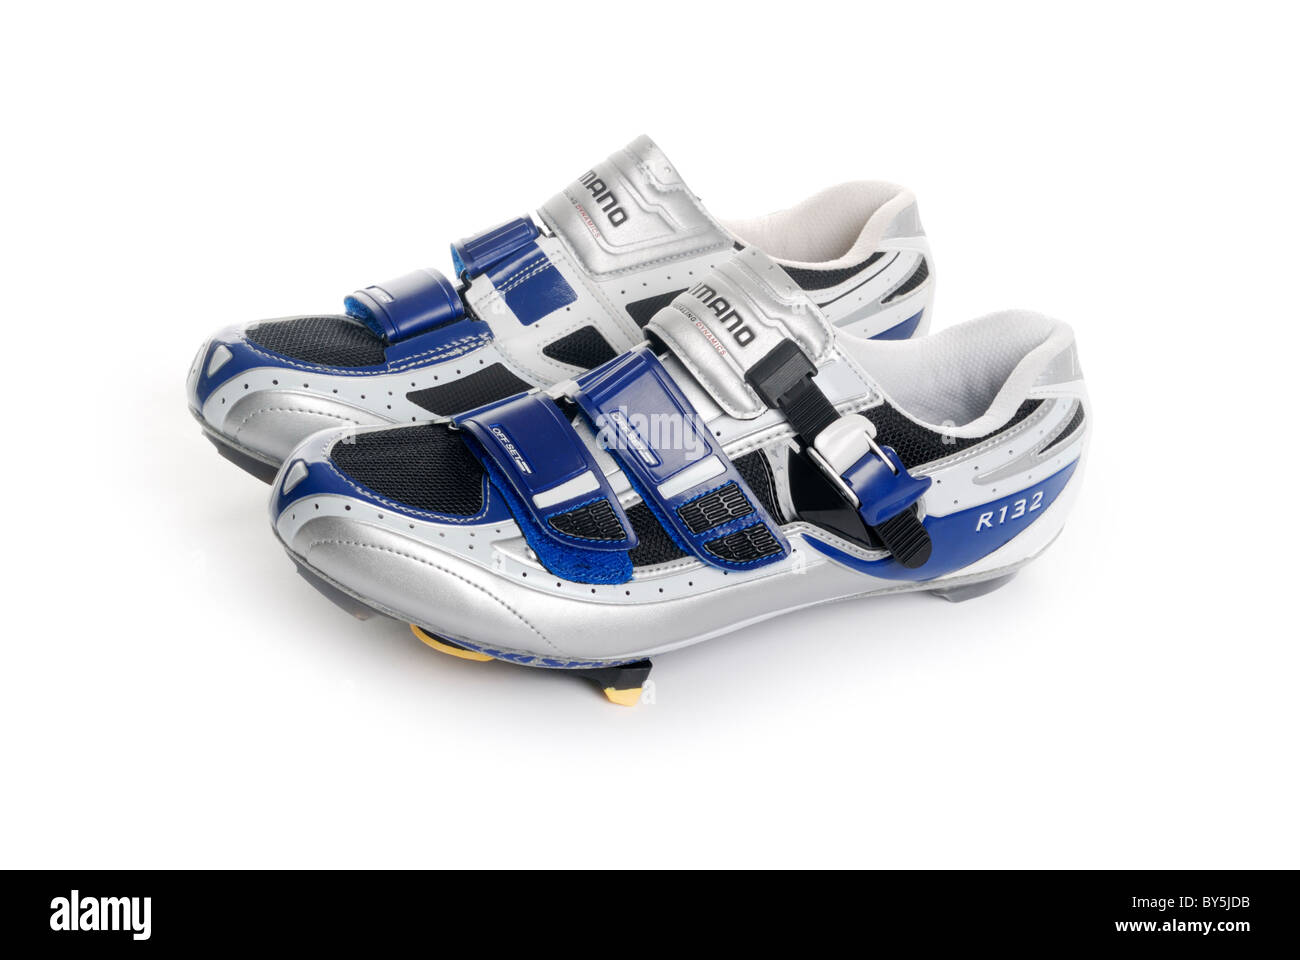 Road cycling shoes Stock Photo